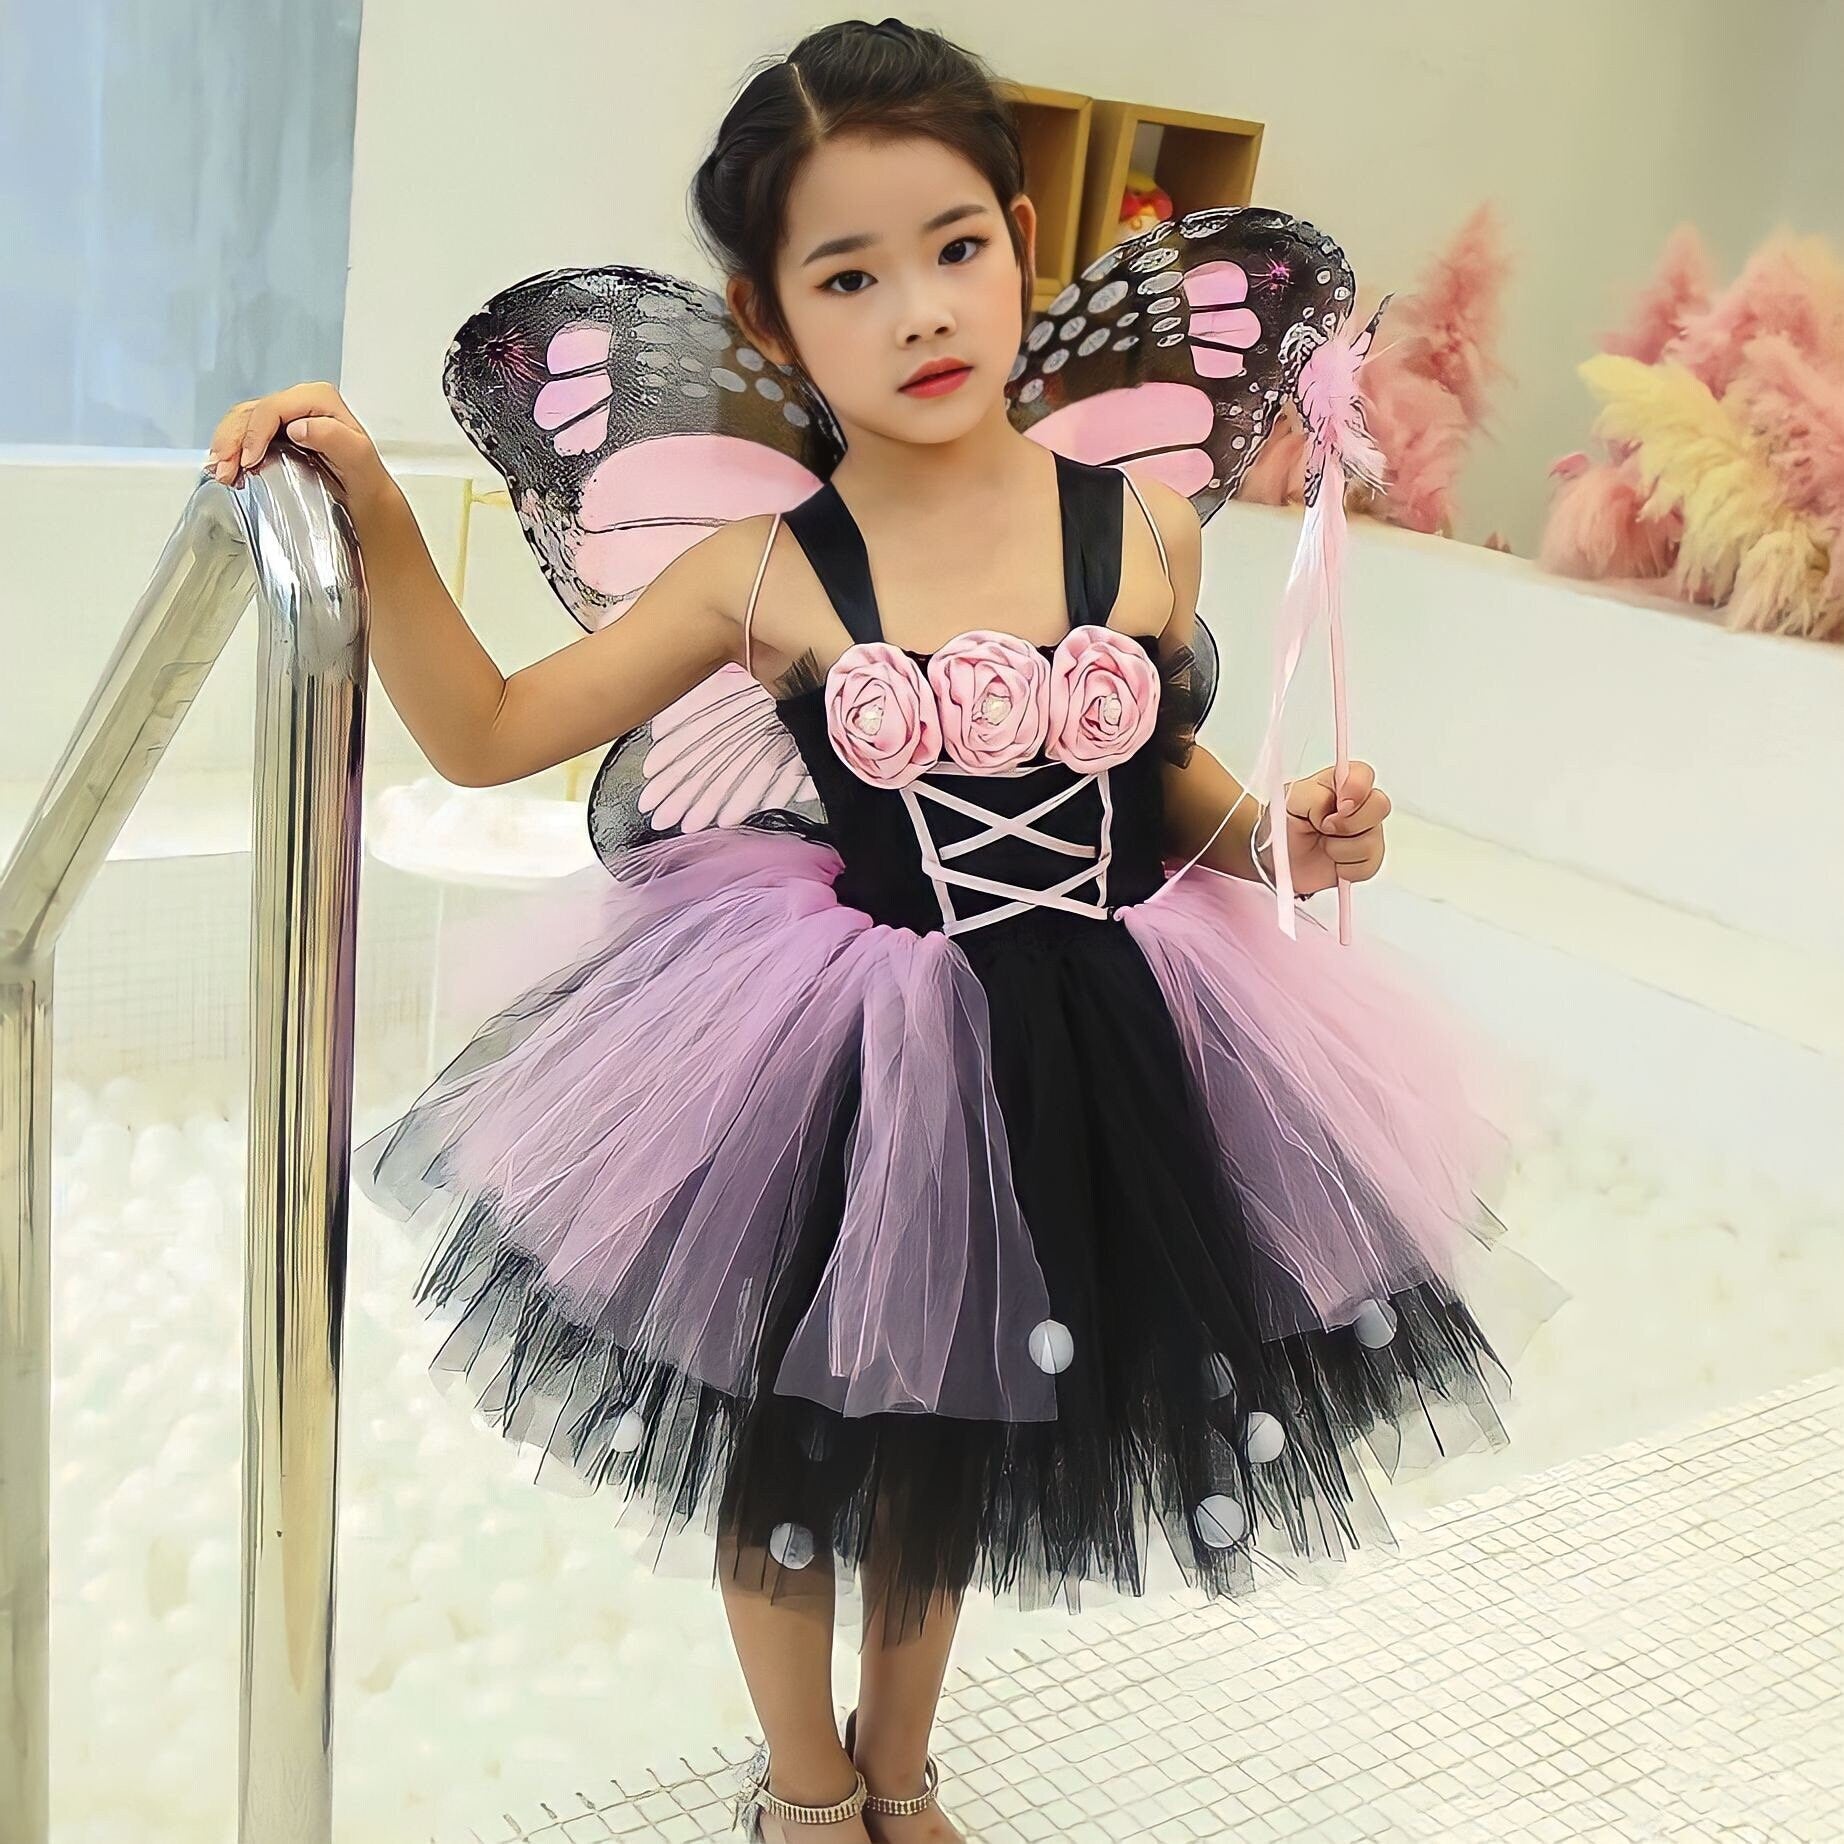 Monarch Butterfly Tutu Dress for Girls Princess Fairy Dresses Toddler Baby Girl Halloween Carnival Costumes Kids Birthday Outfit